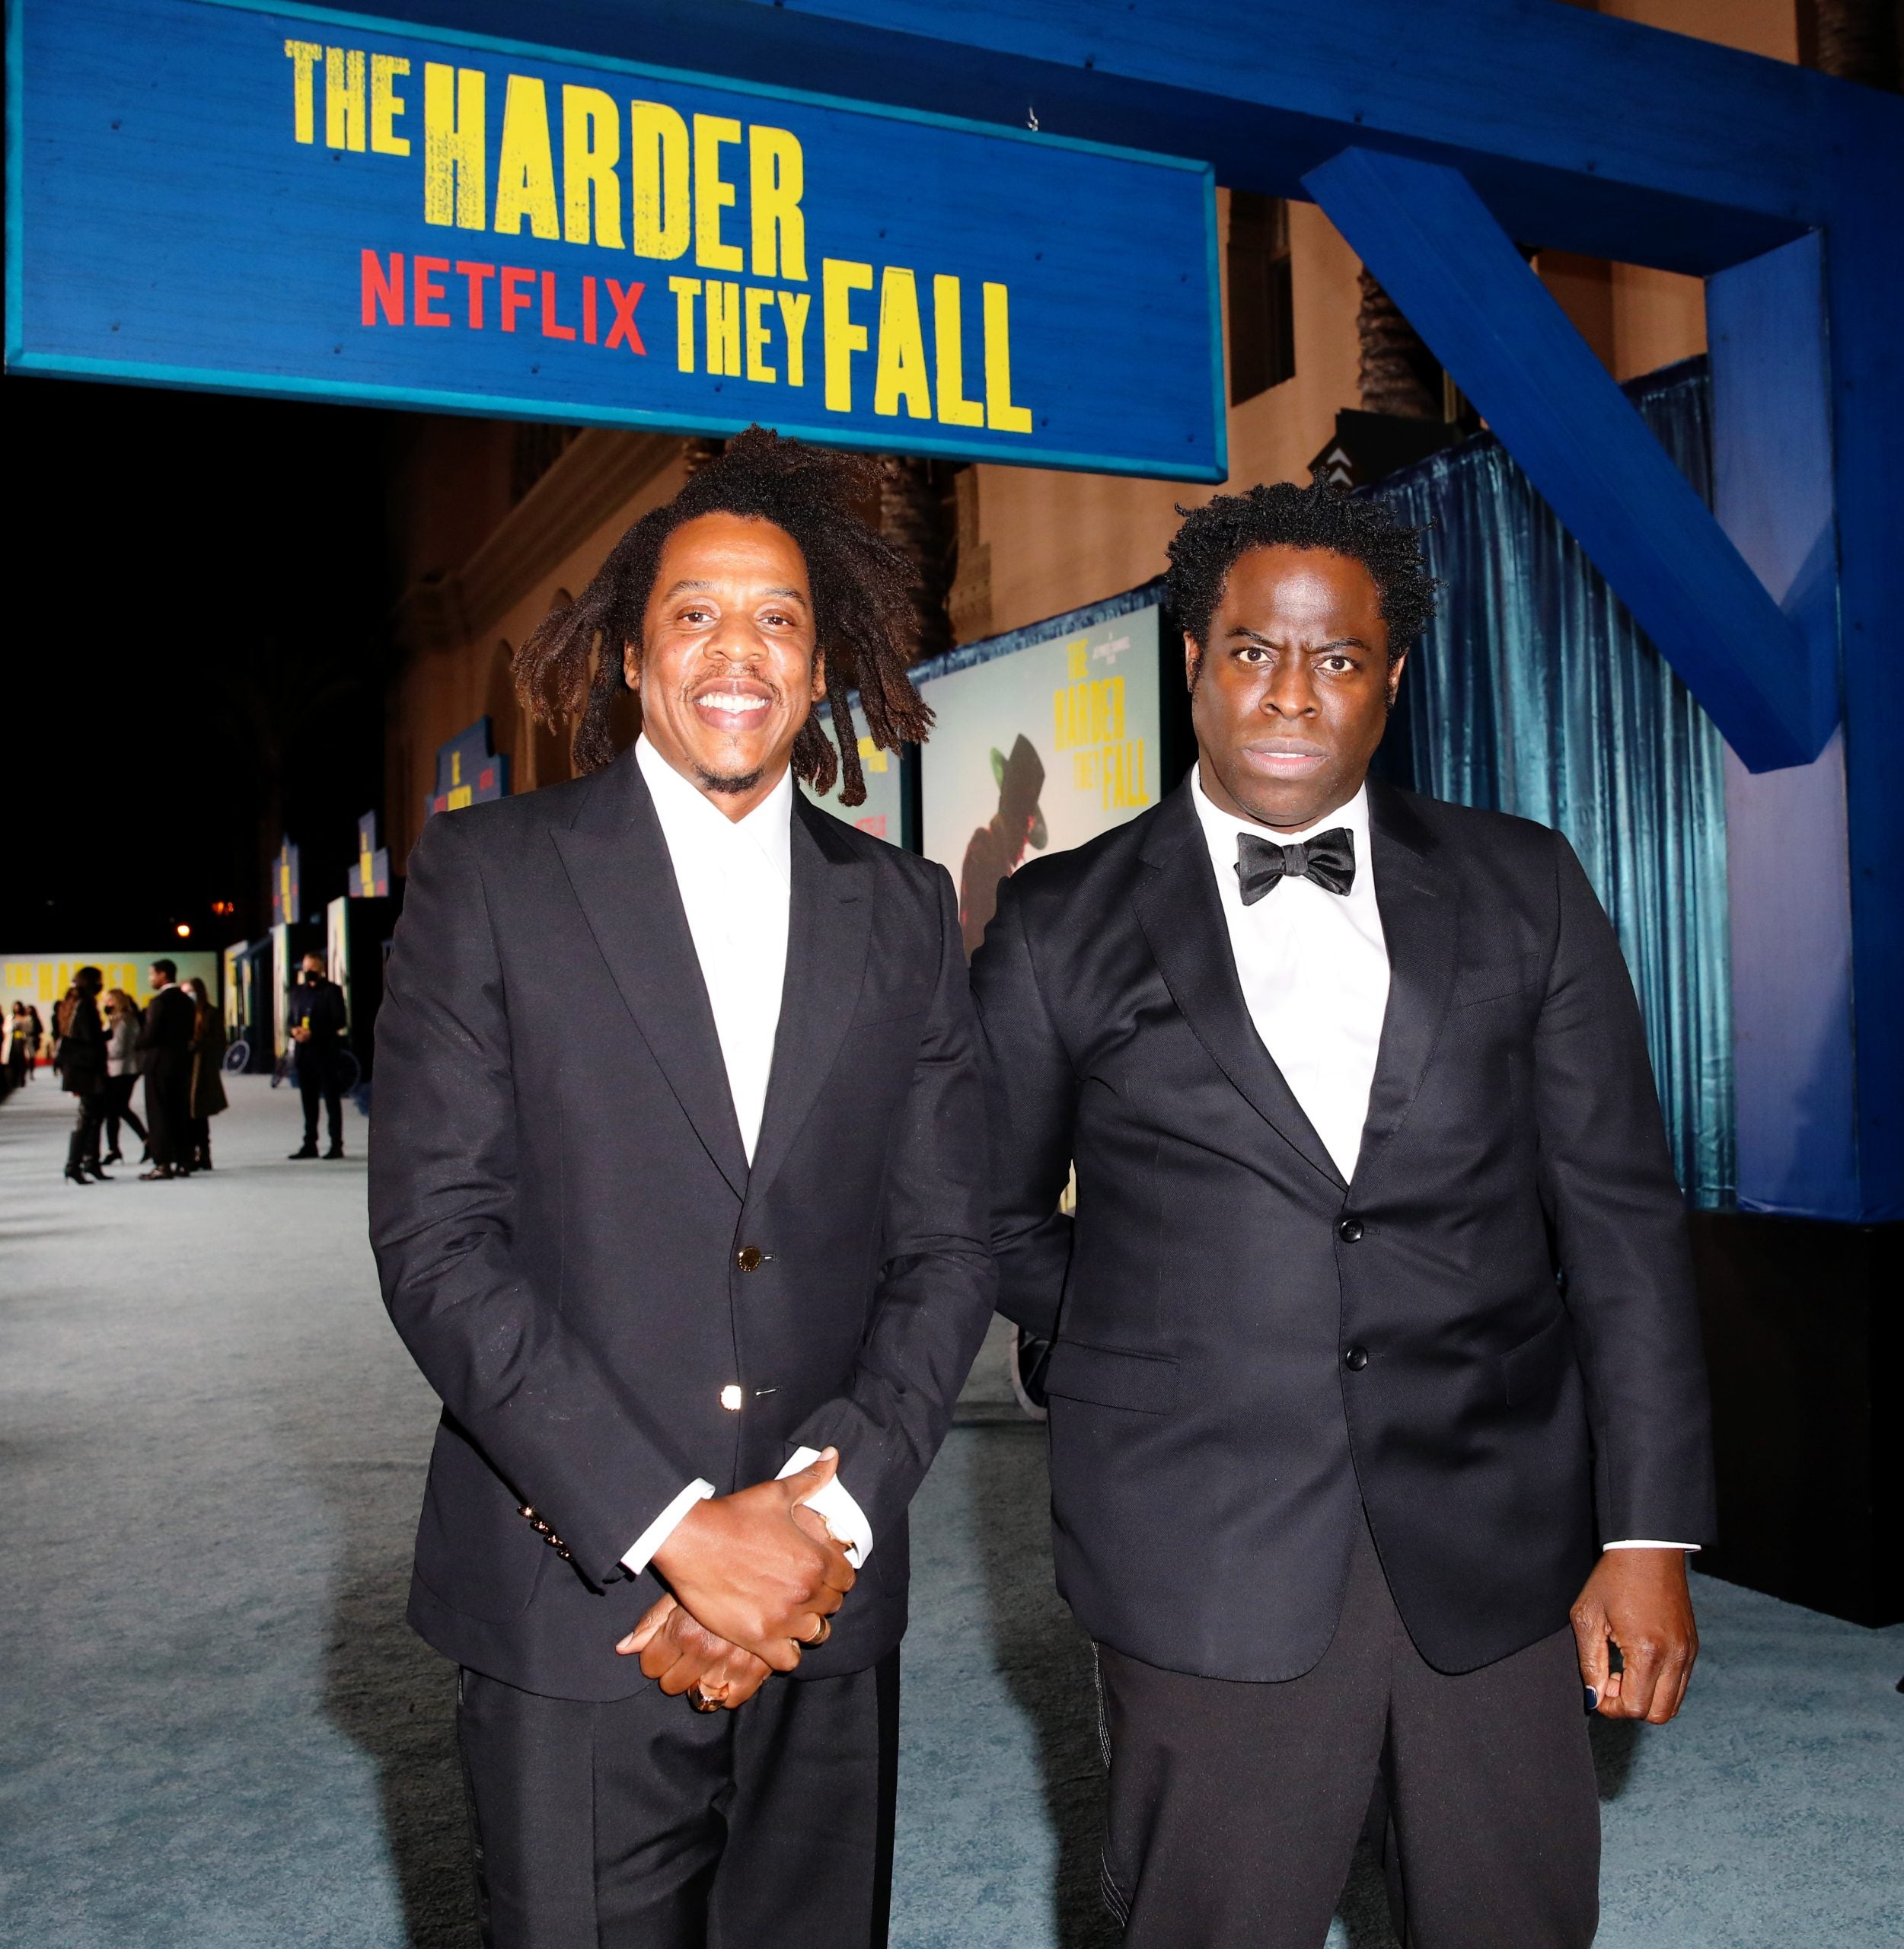 Jeymes Samuel Details Why No One Says The N-Word In ‘The Harder They Fall’